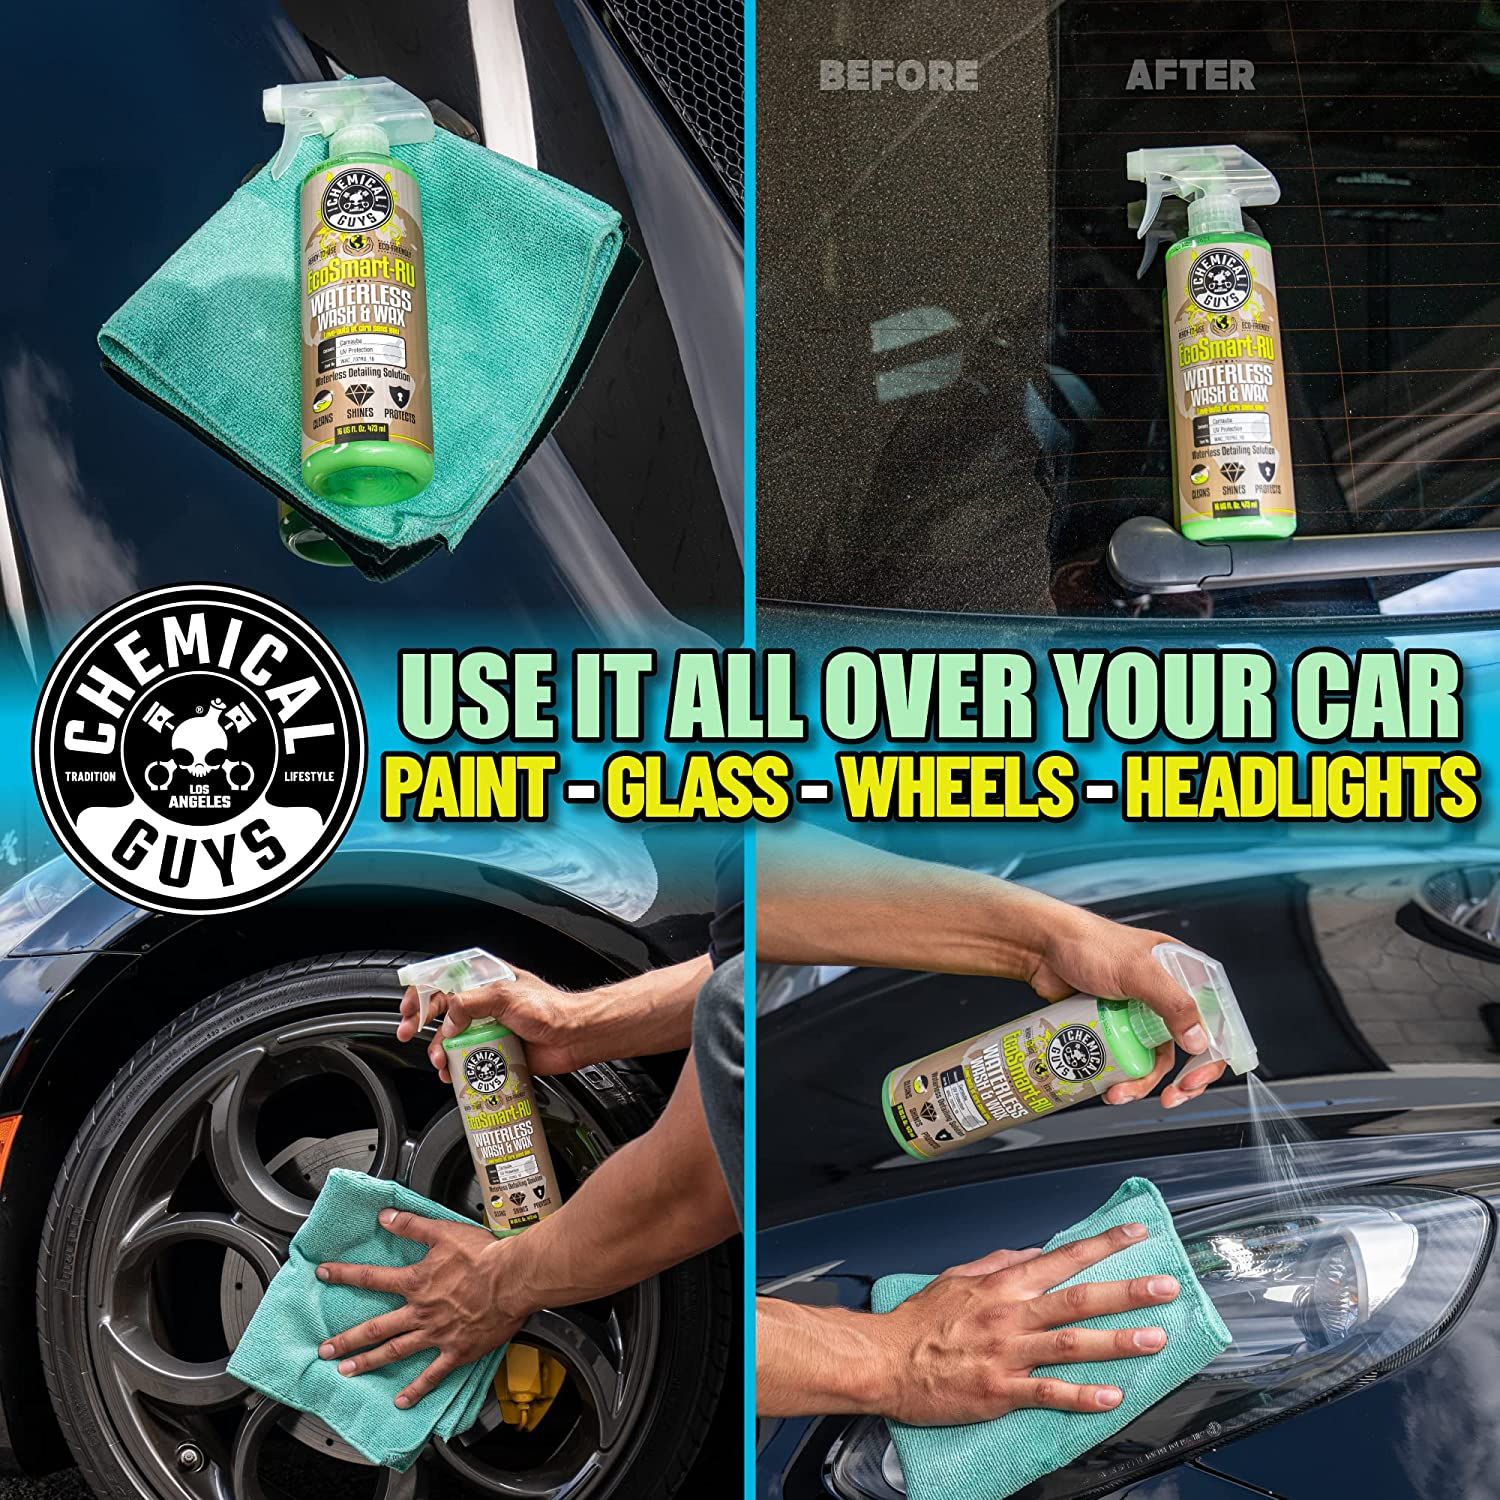 Chemical Guys - EcoSmart-RU Ready to Use Waterless Car Wash and Wax (16 oz)